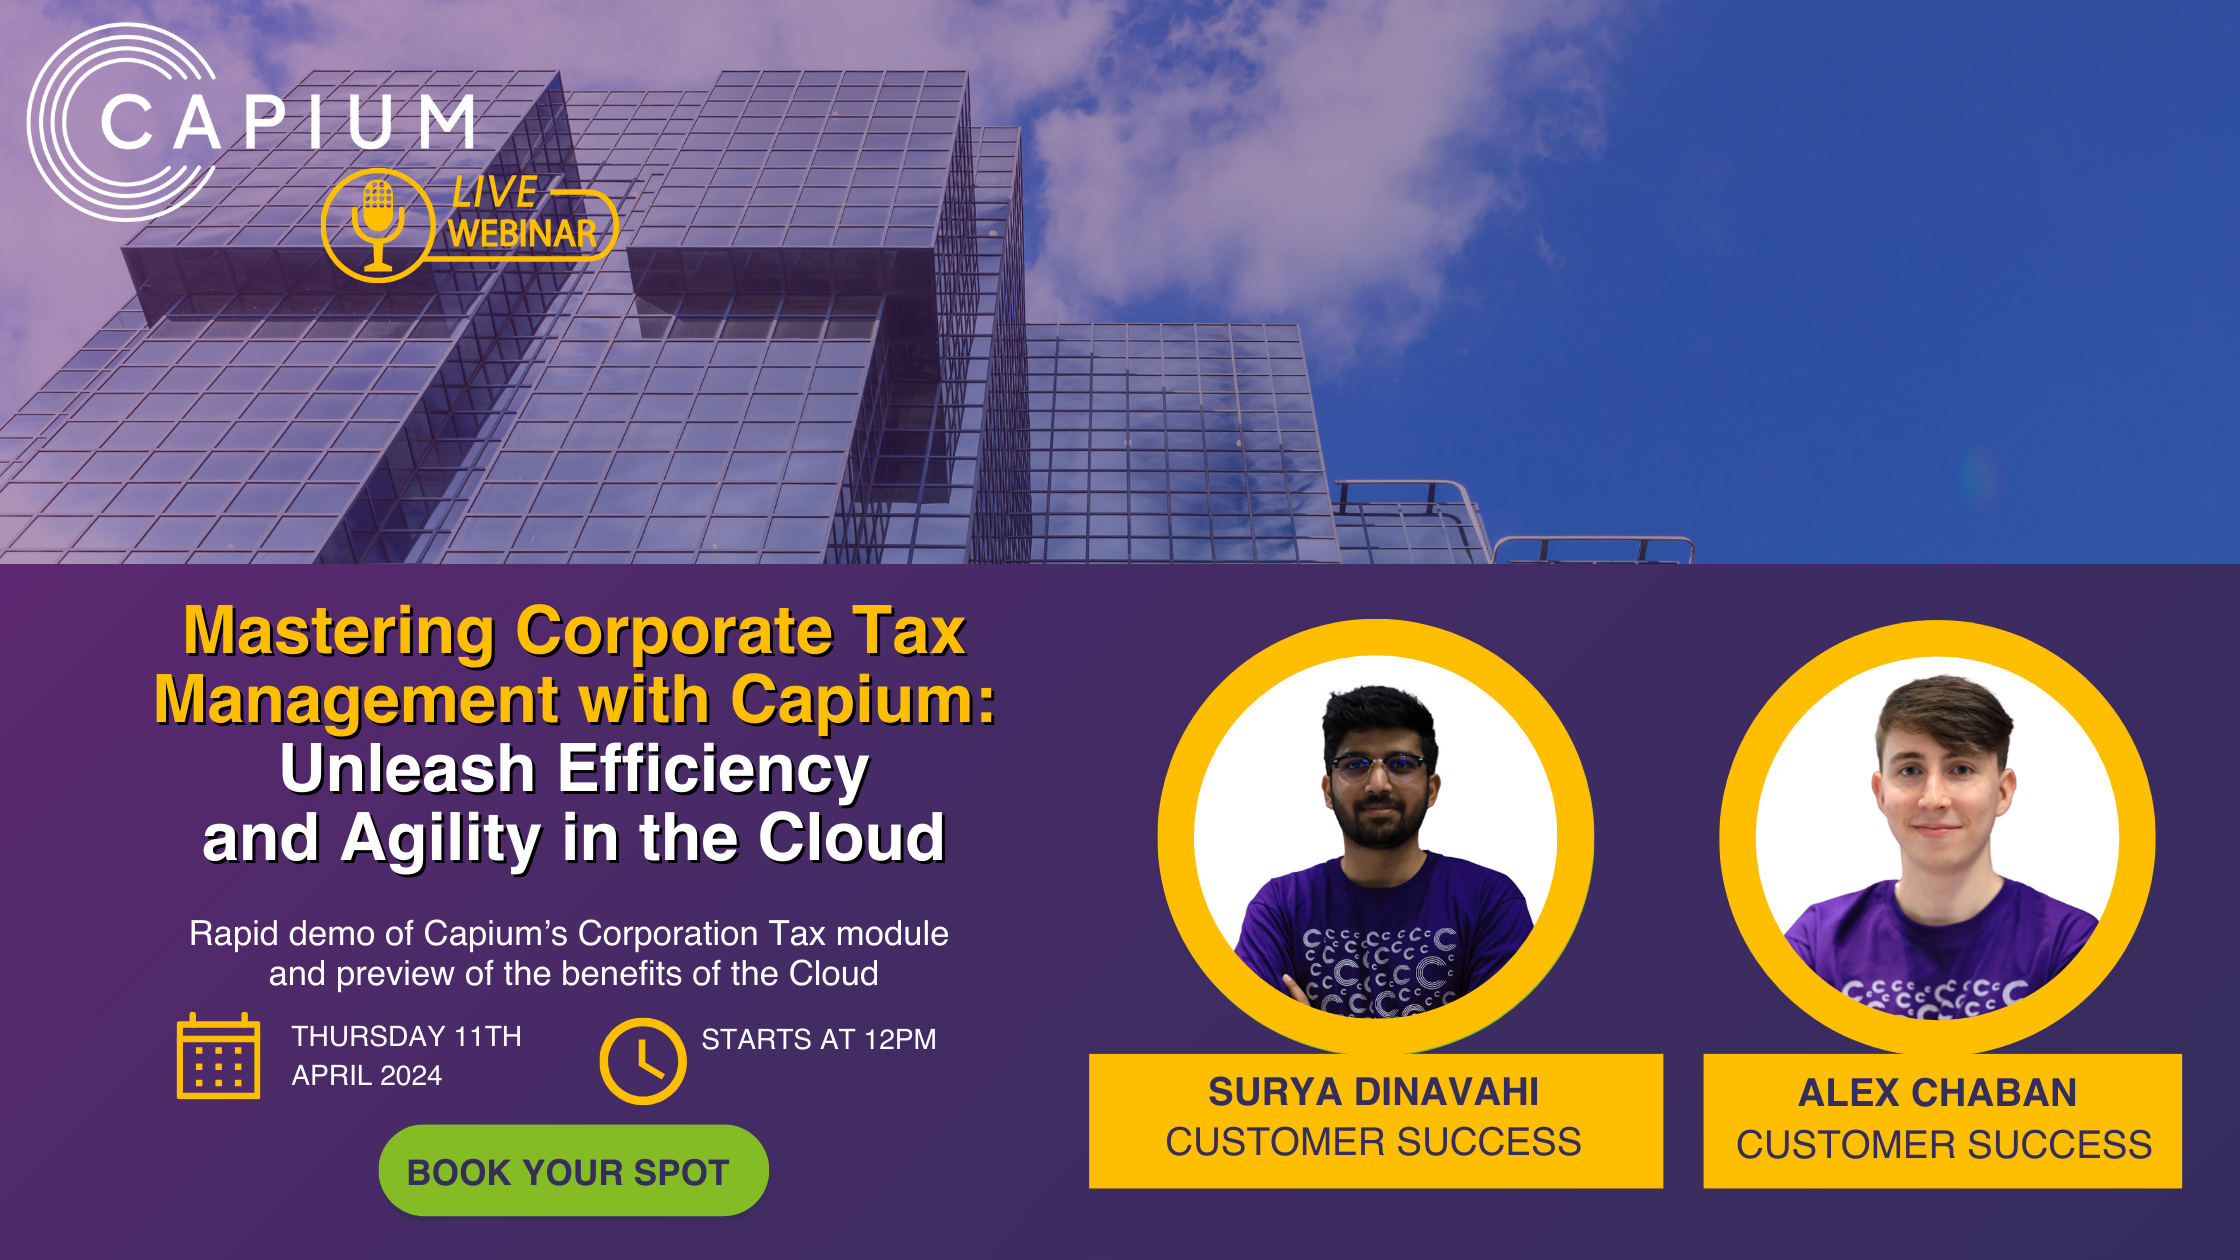 Mastering Corporate Tax Management with Capium: Unleash Efficiency and Agility in the Cloud image